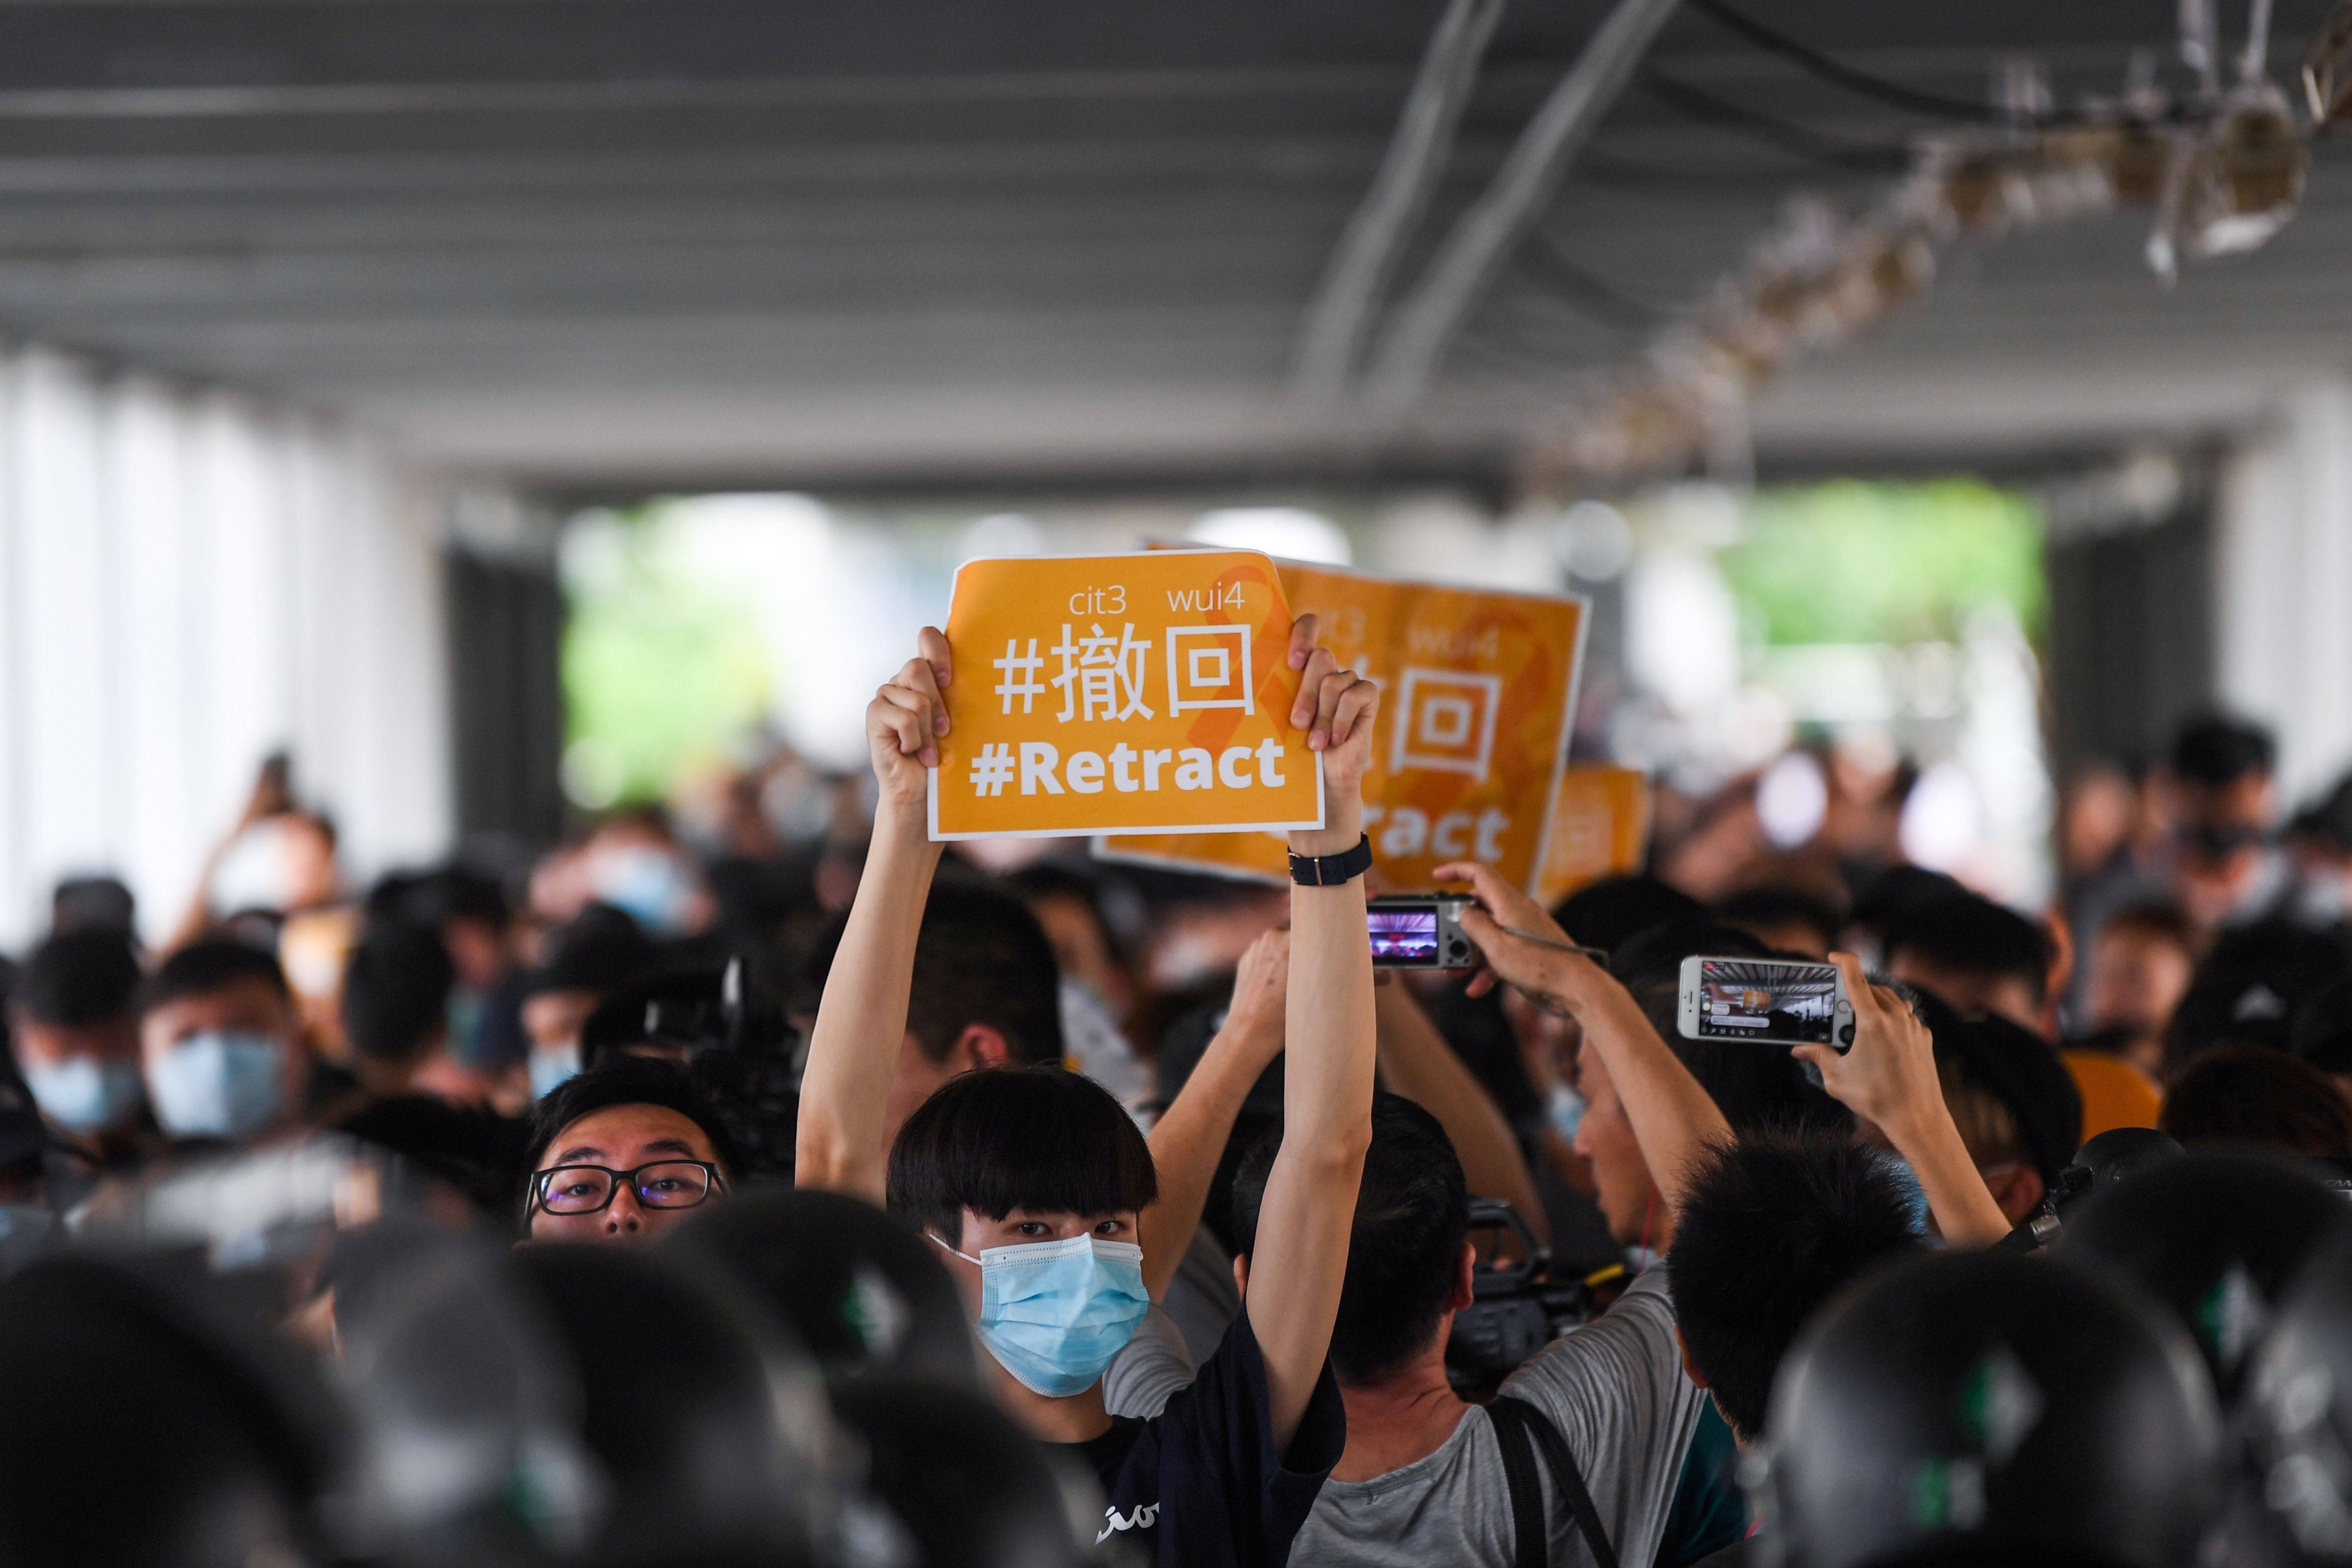 Protesters display placards during a demonstration against a controversial extradition law proposal in Hong Kong on June 13, 2019. 